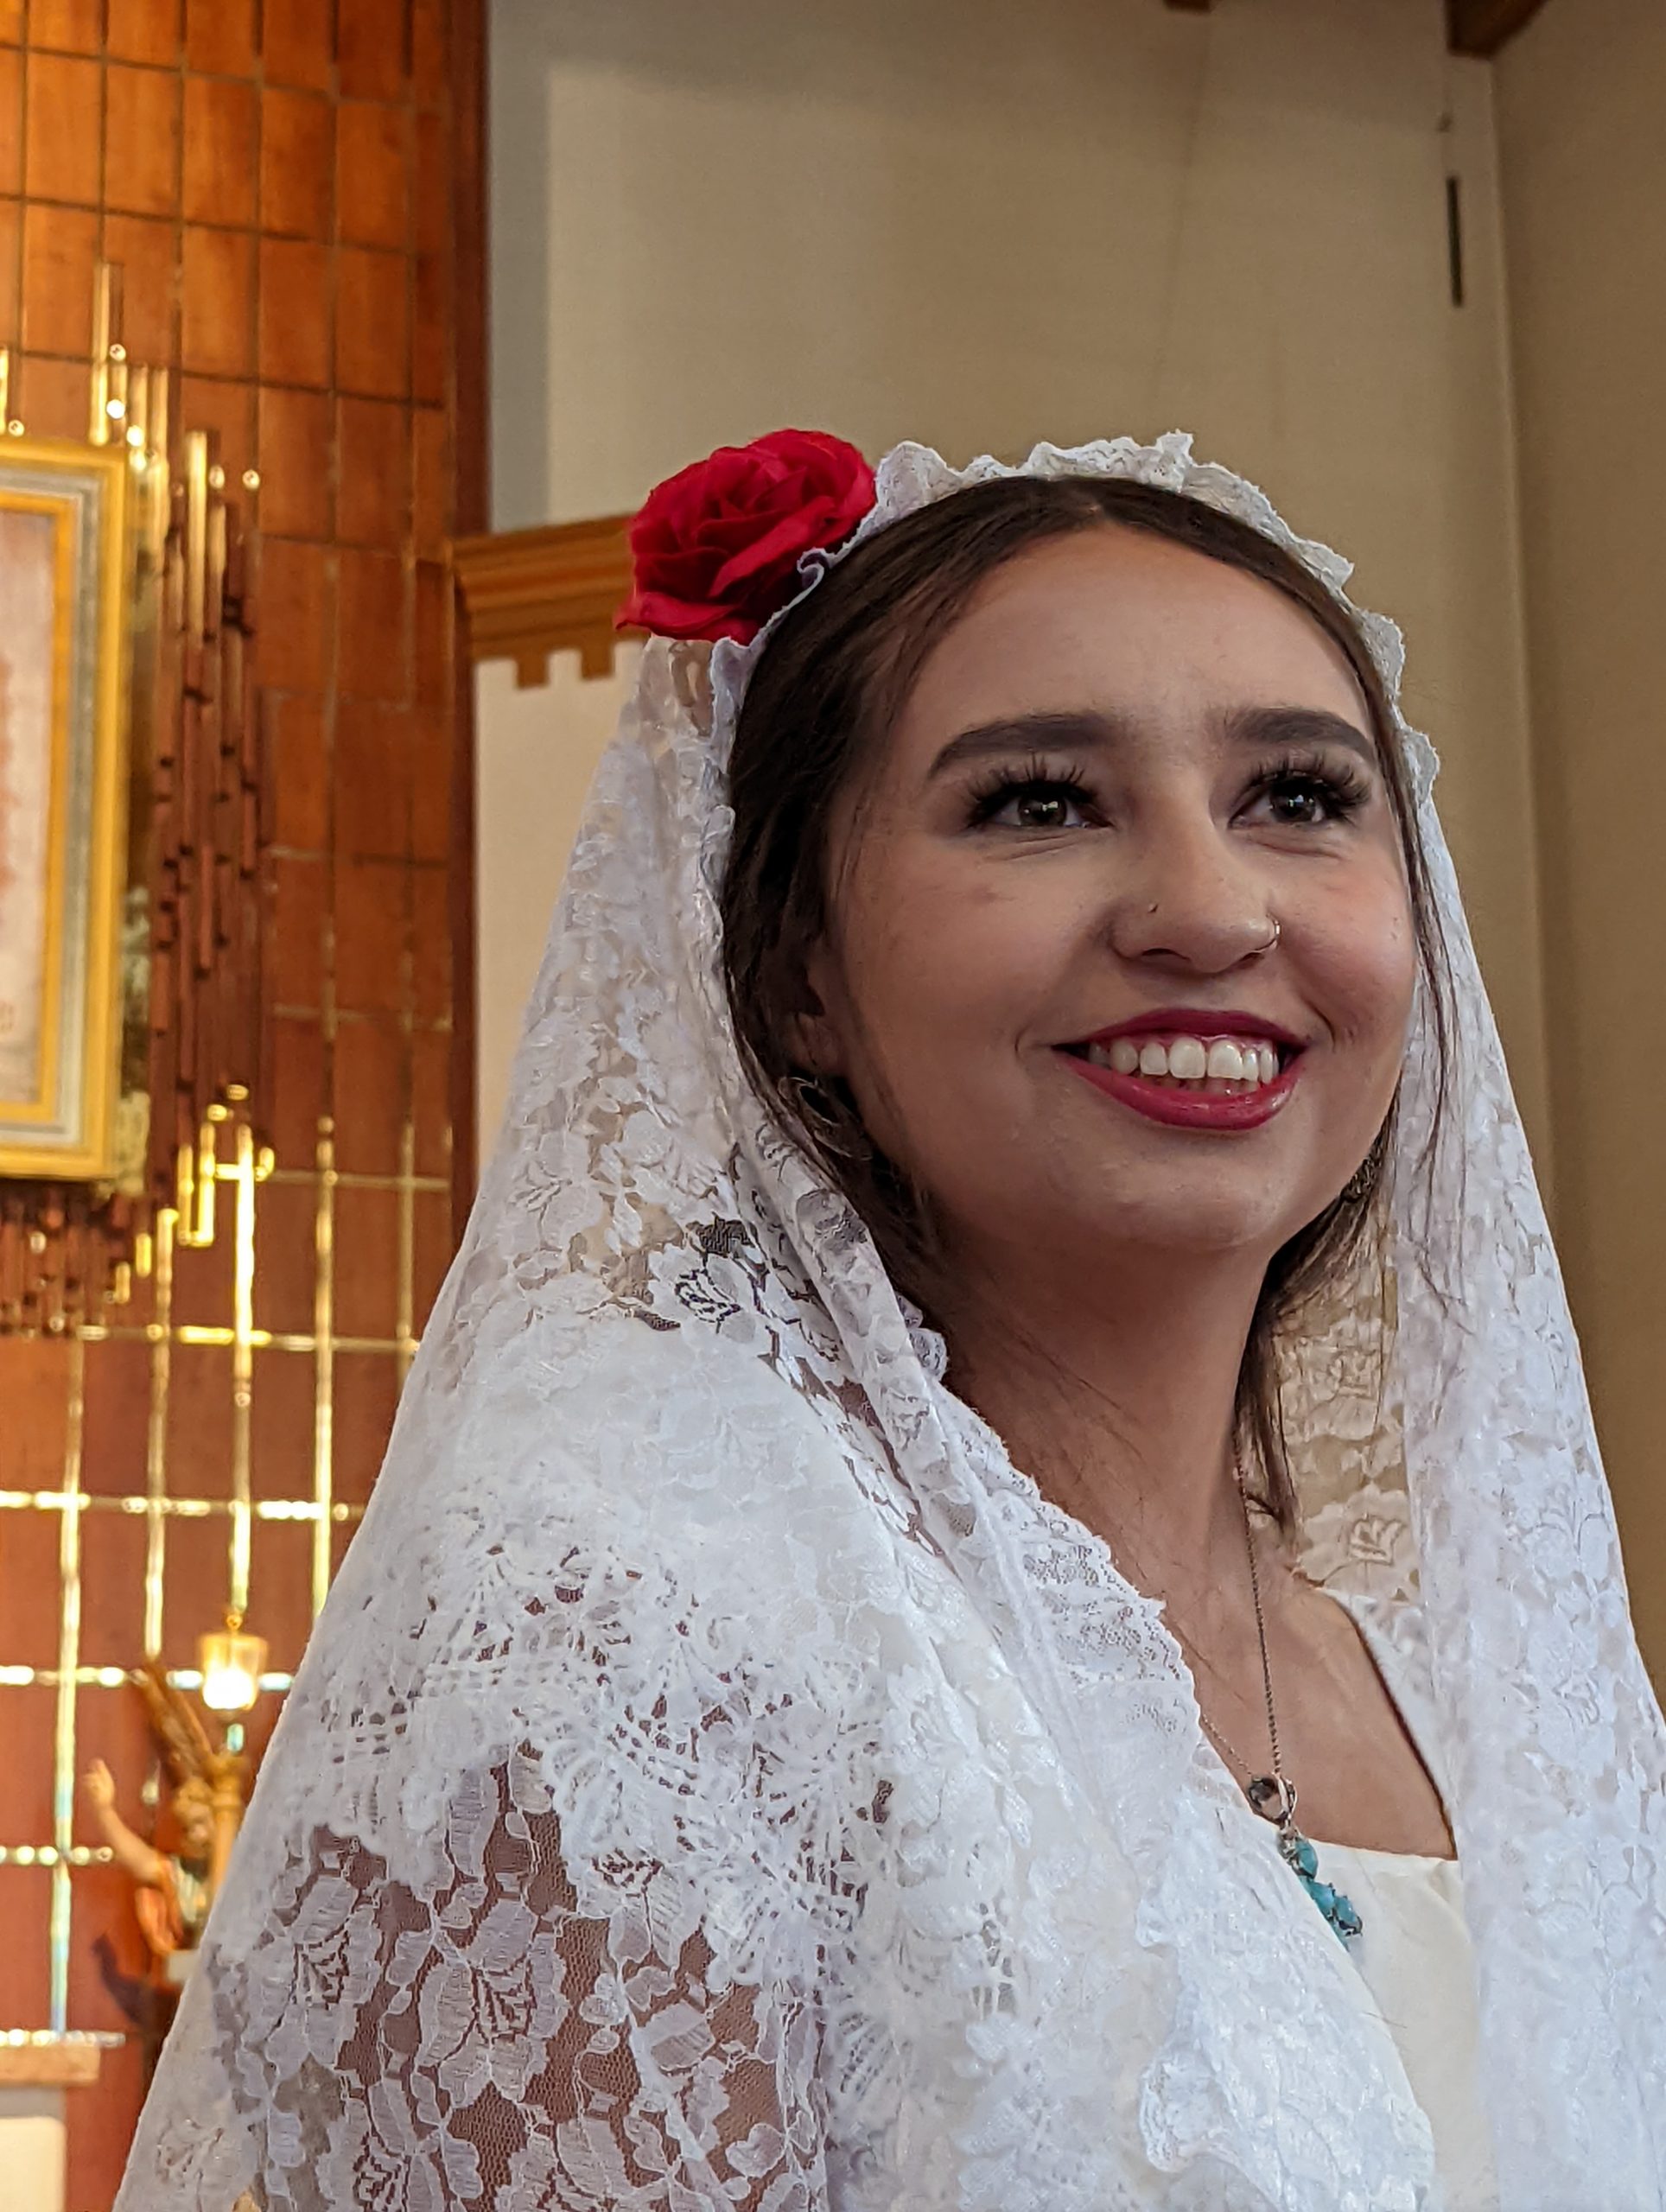 Woman smiling in a lace veil